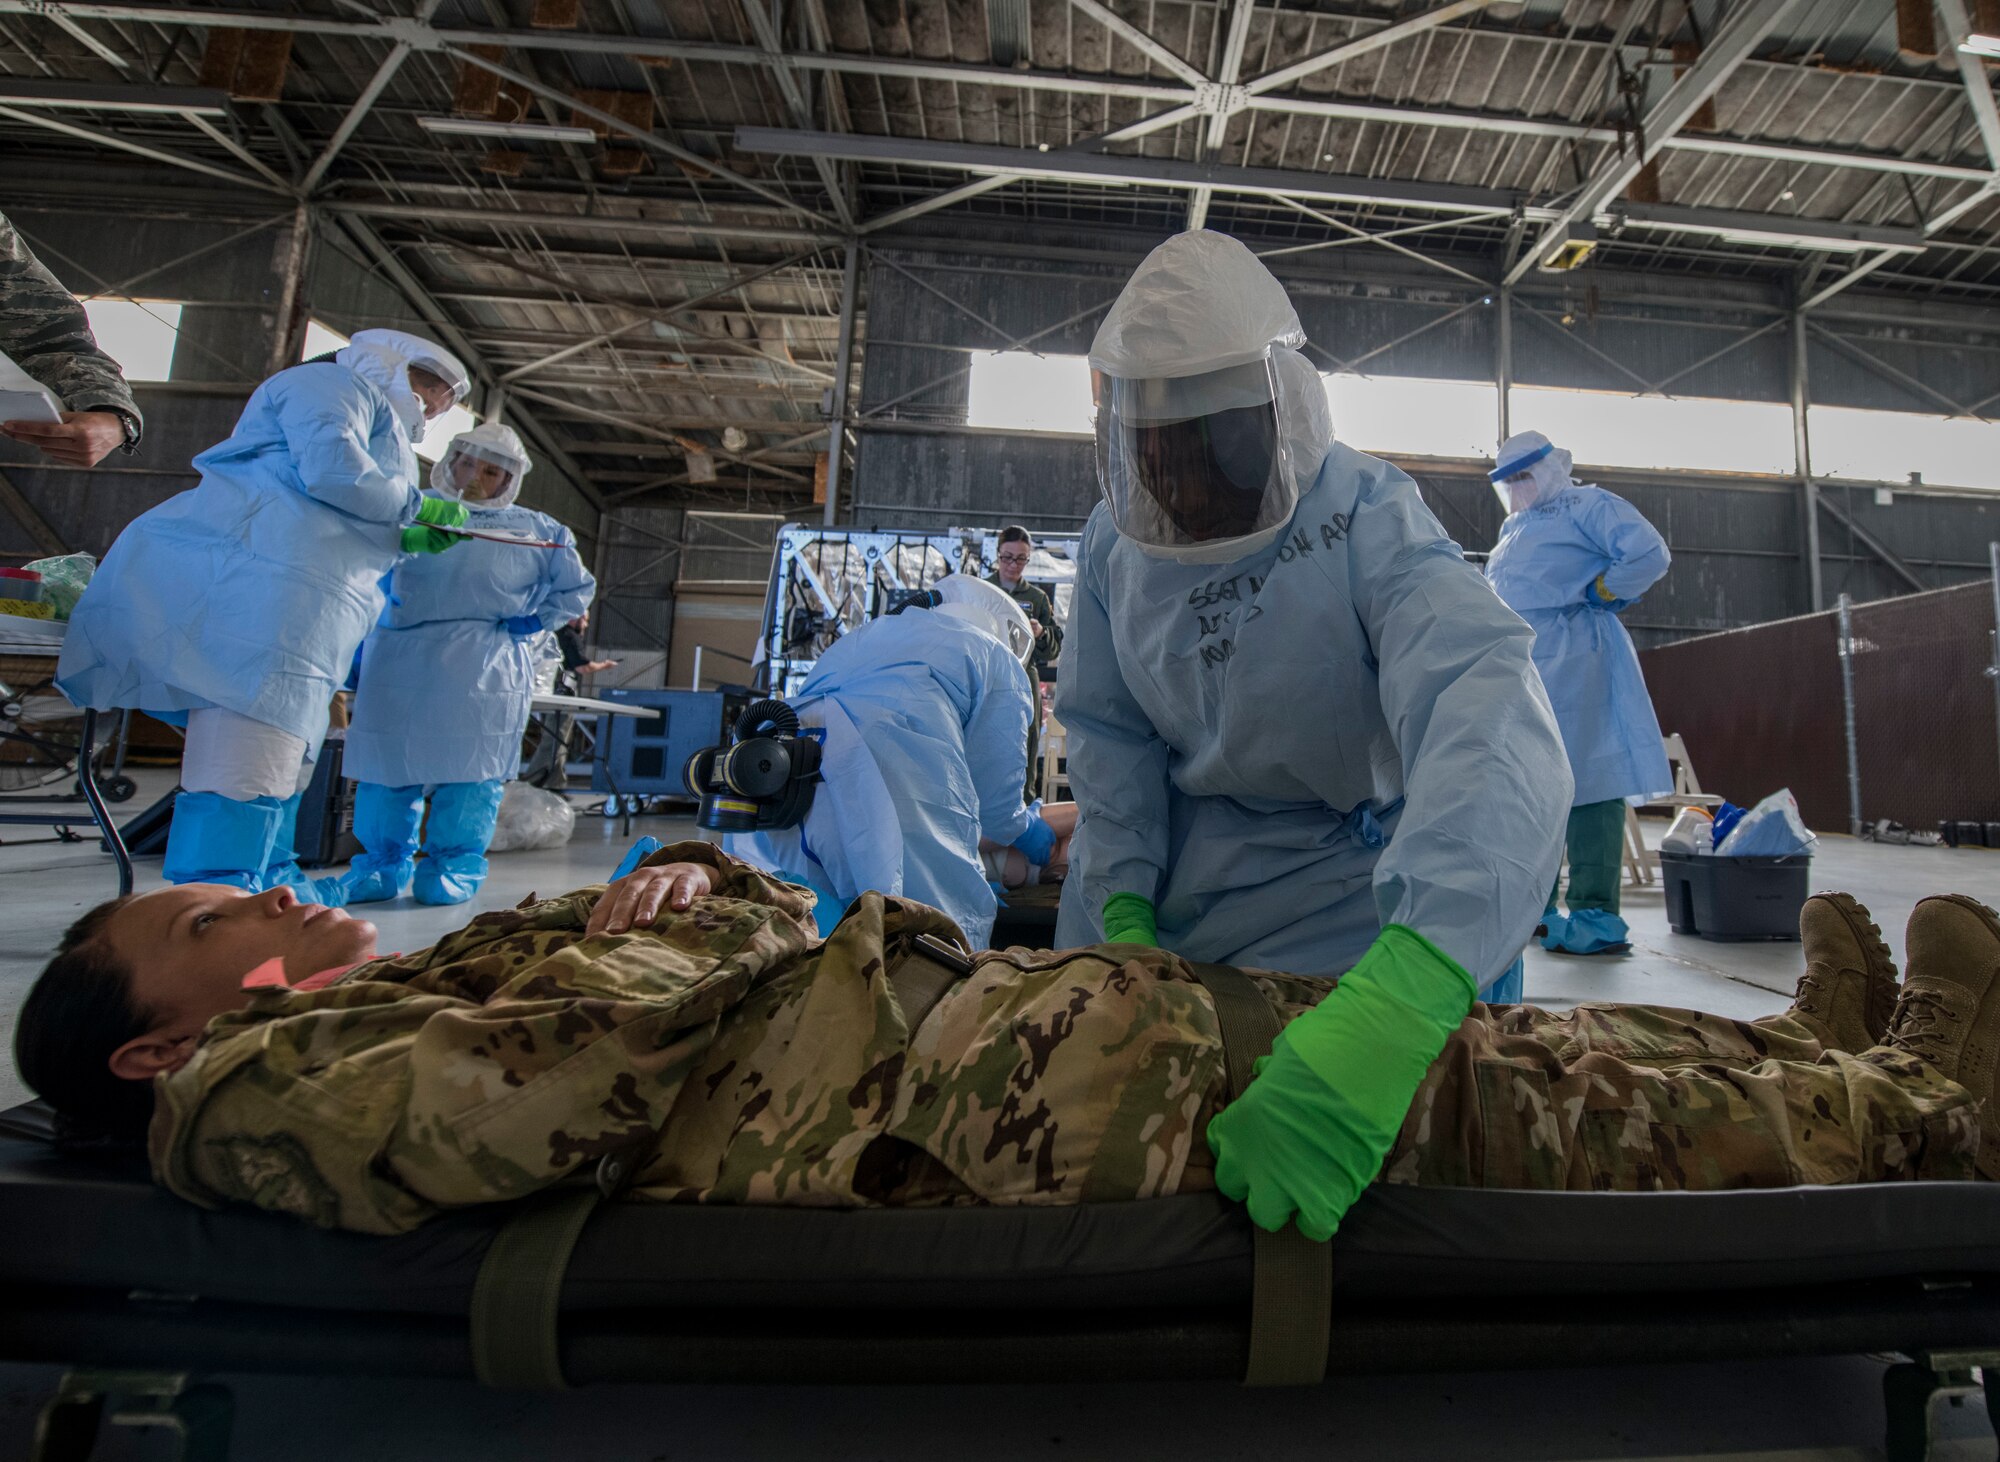 Image of Staff Sgt. Lee Nembhard, an aeromedical evacuation technician assigned to the 375th Aeromedical Evacuation Squadron from Scott Air Force Base, Illinois.